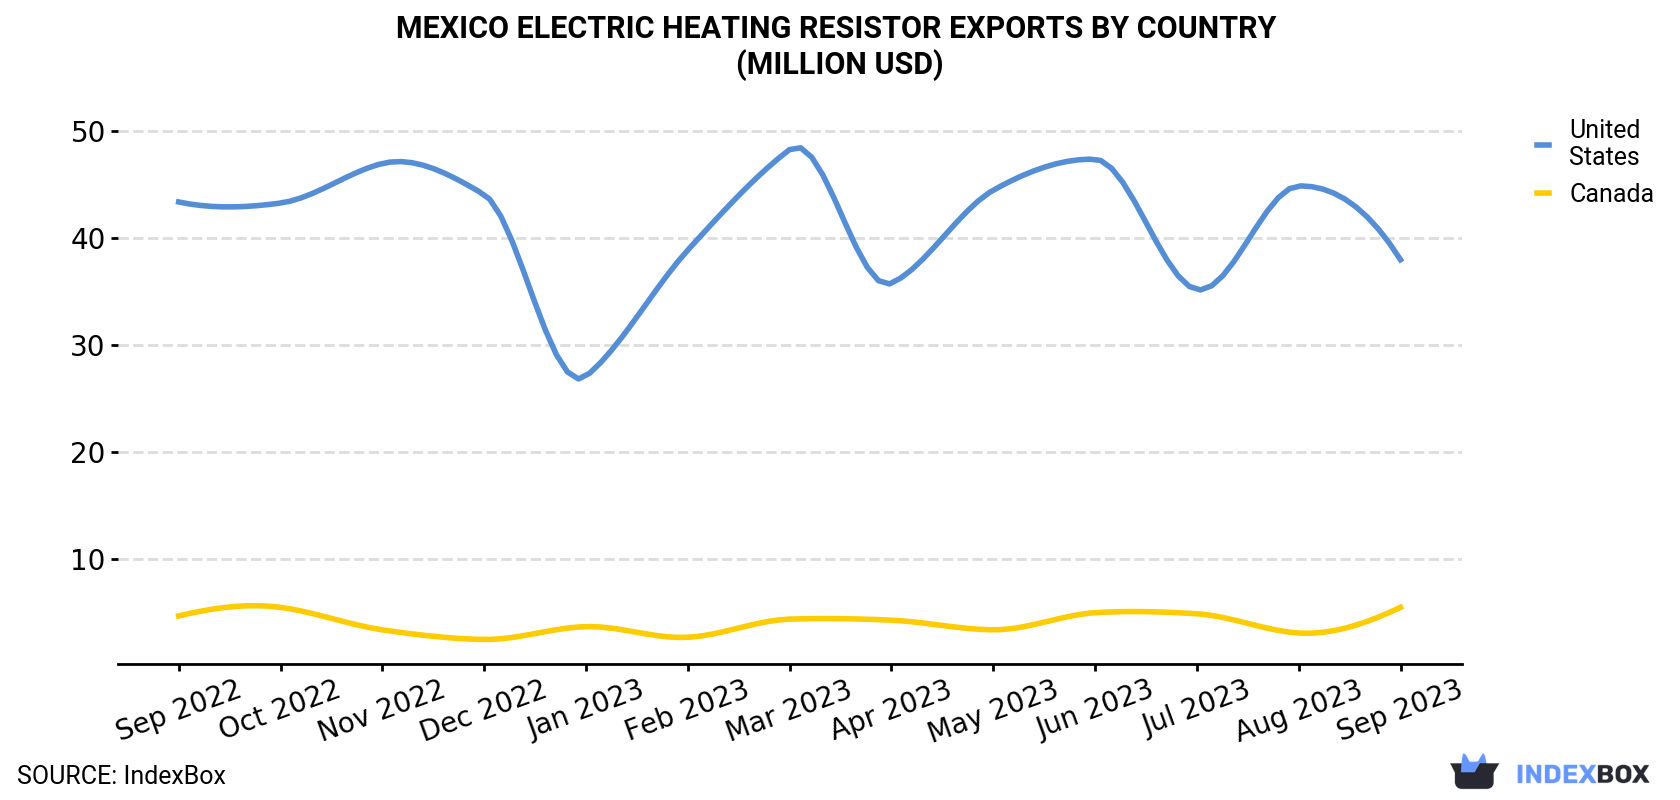 Mexico Electric Heating Resistor Exports By Country (Million USD)